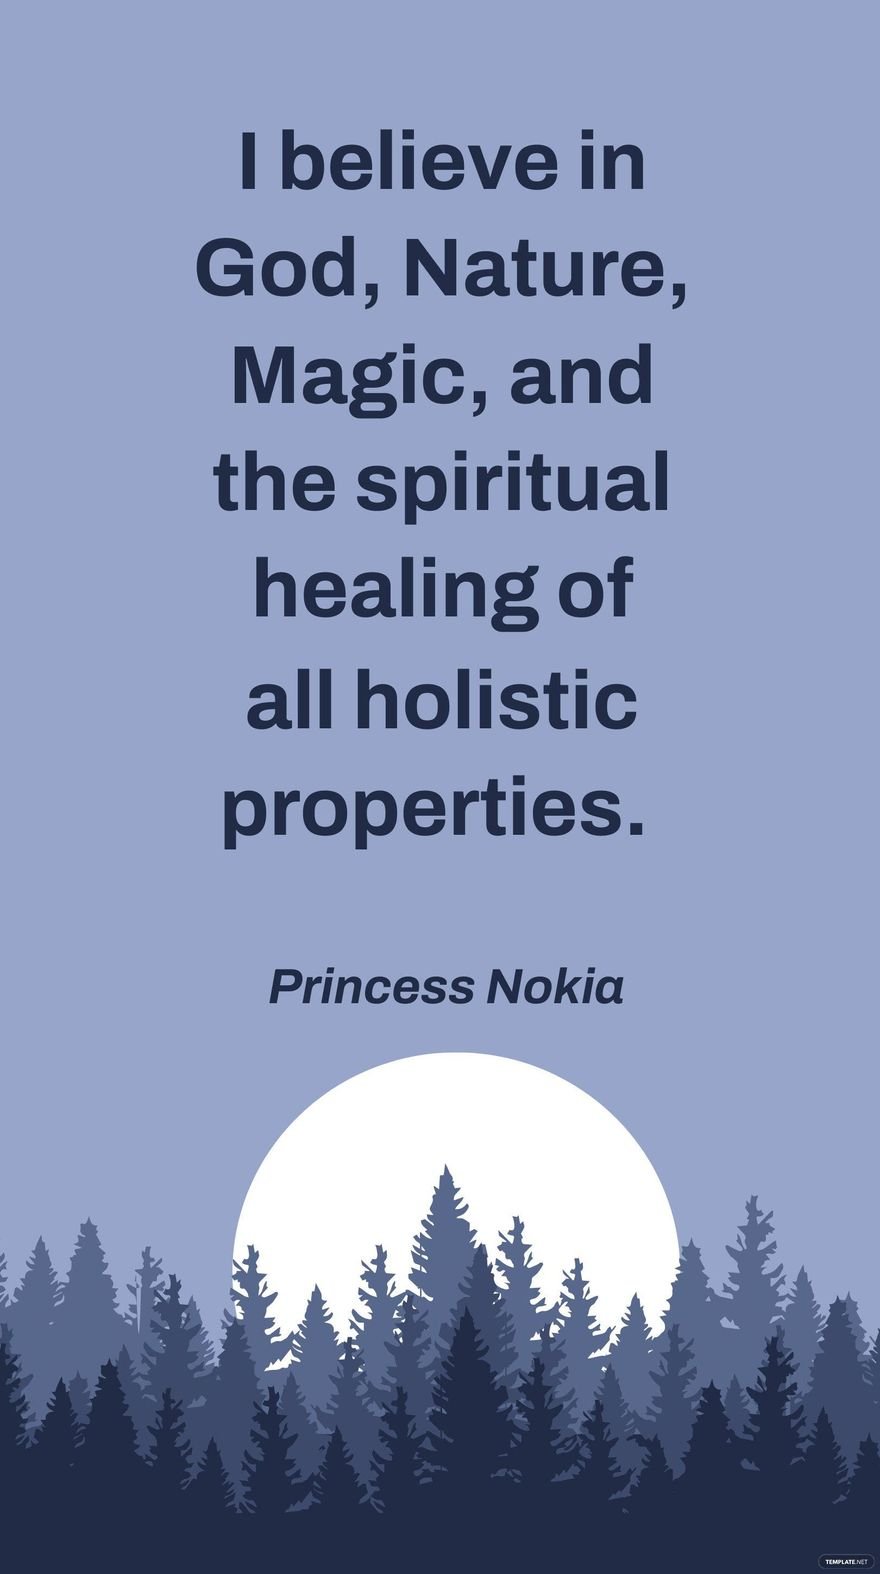 Princess Nokia - I believe in God, Nature, Magic, and the spiritual healing of all holistic properties. in JPG